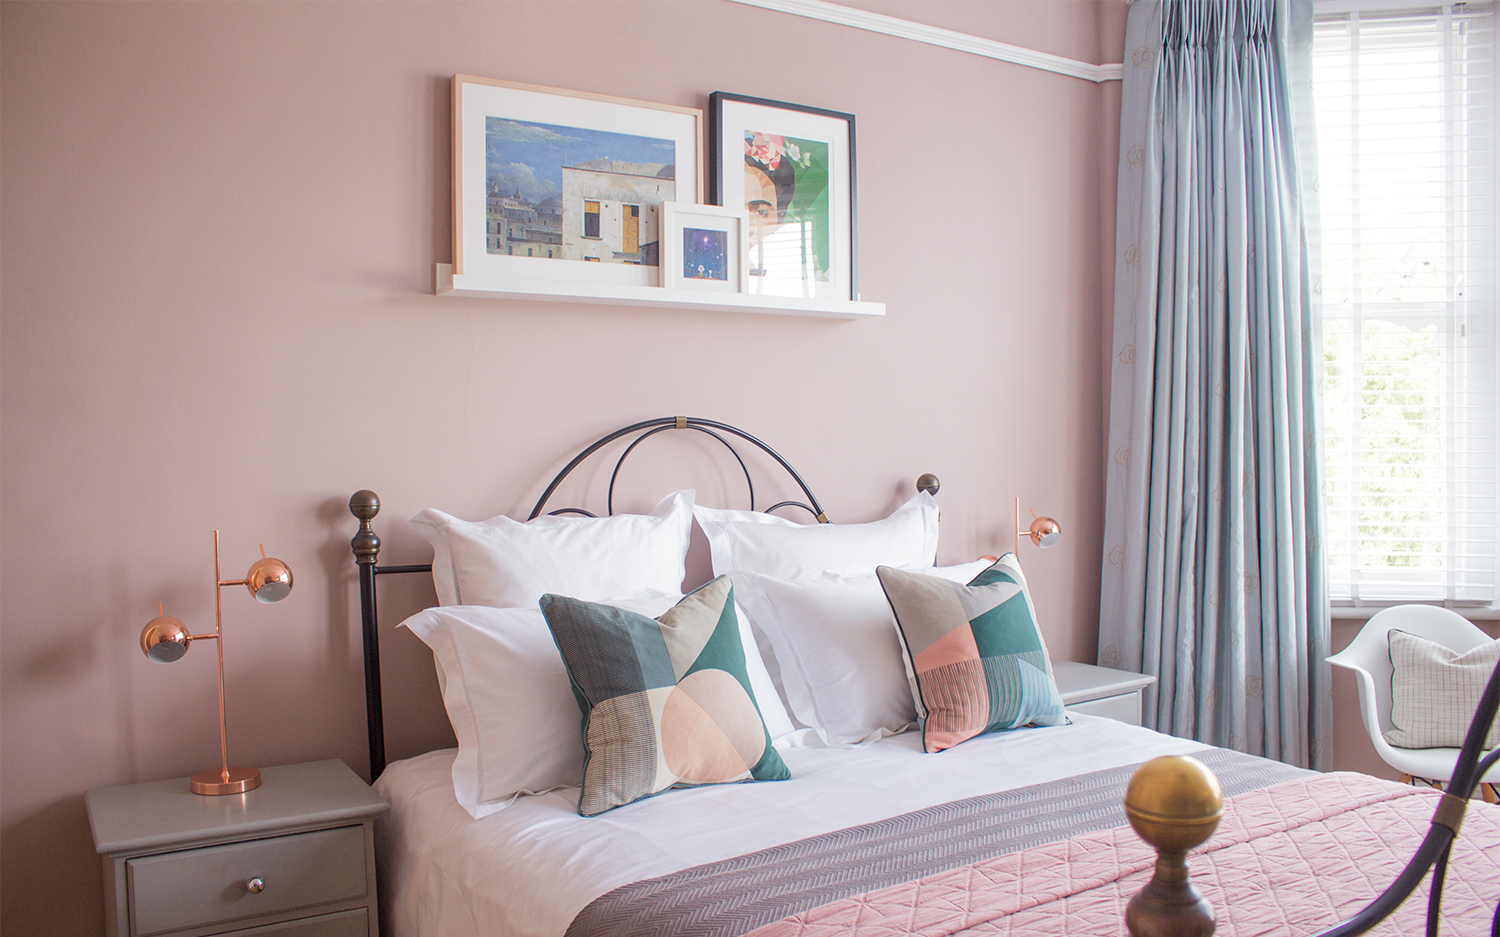 the pink paint colour on the walls, in a finished bedroom project